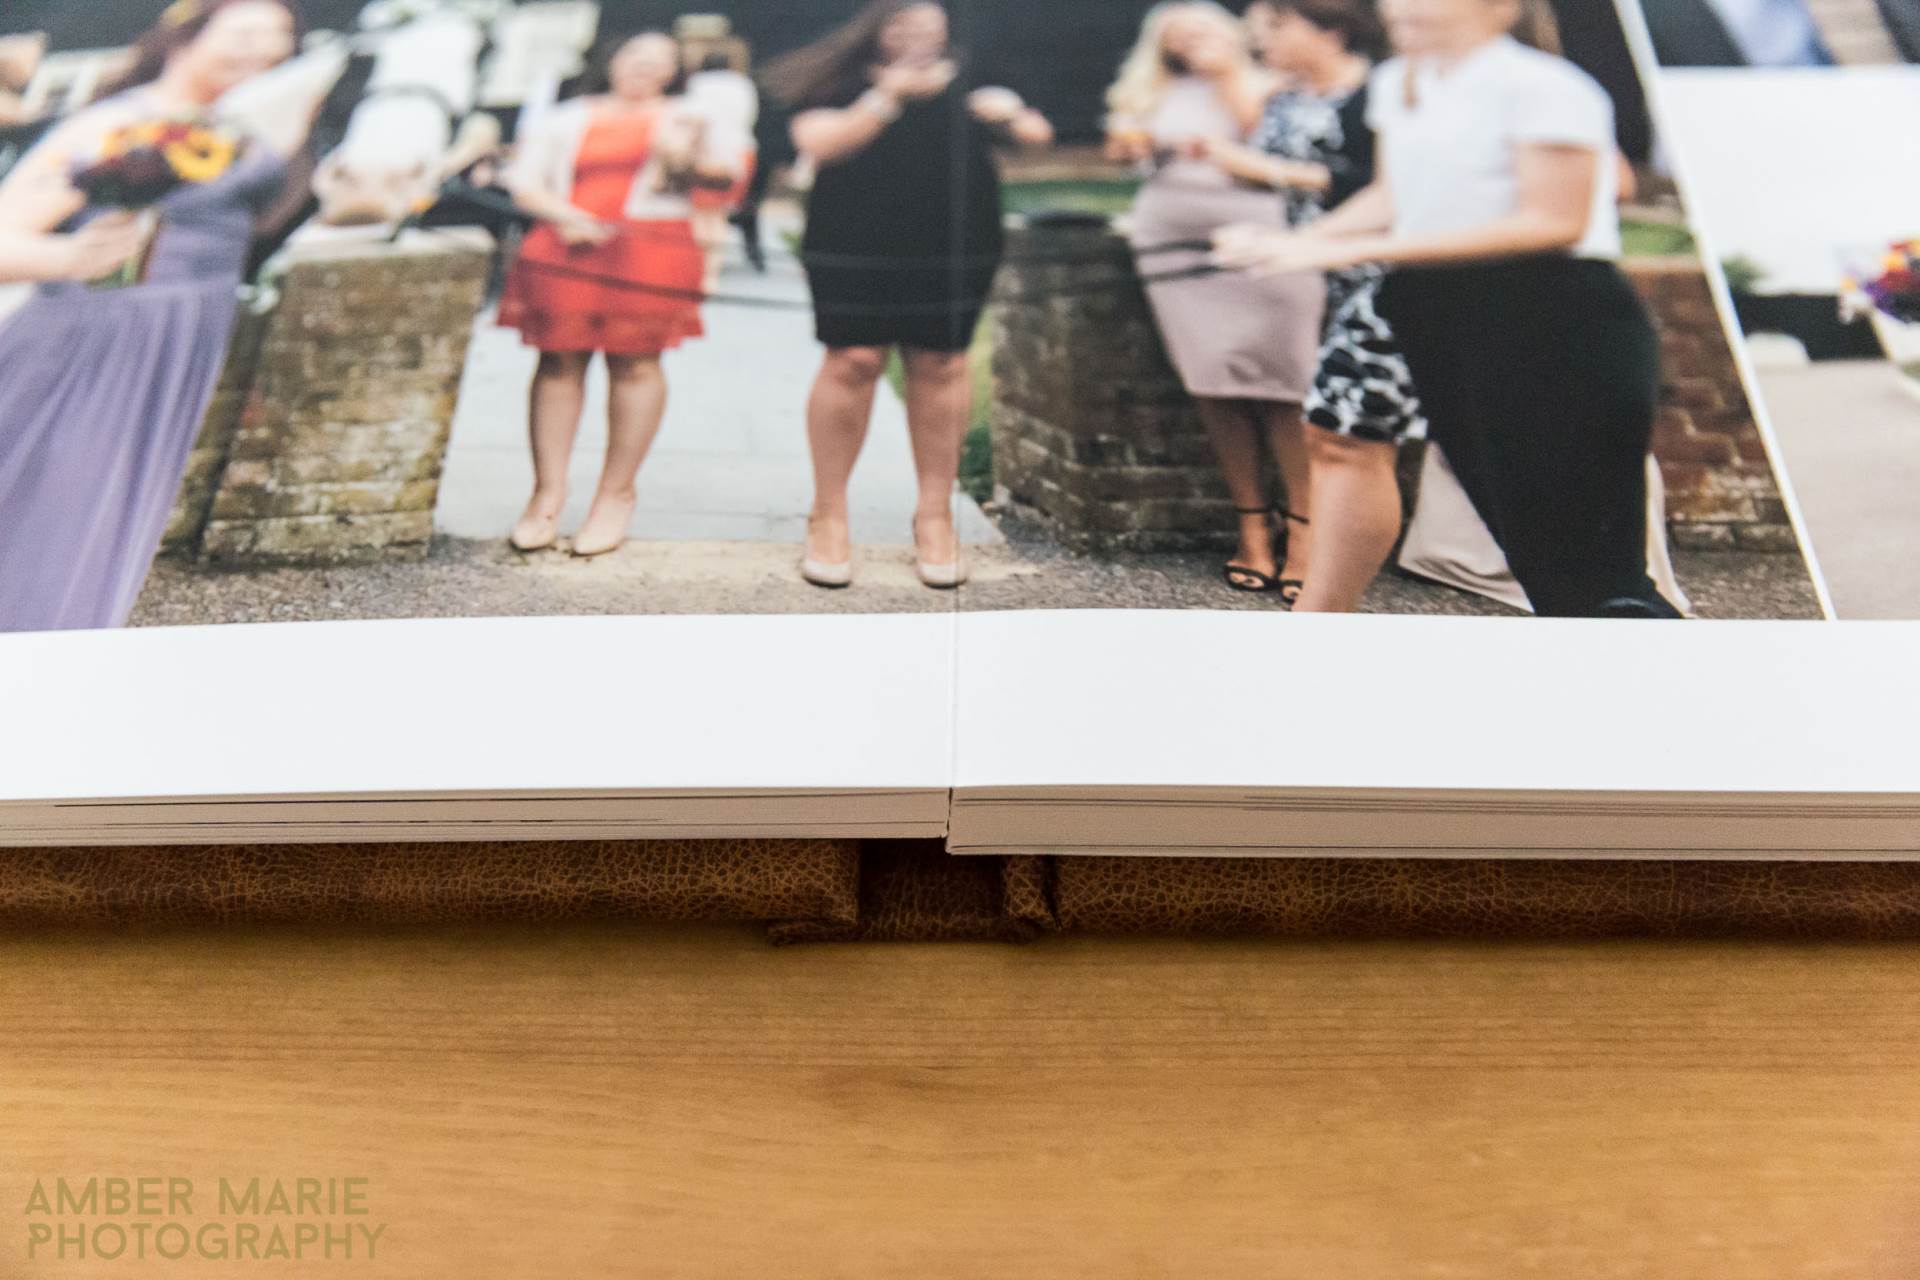 Do you need to order a wedding photo album of your wedding photos by Amber Marie Photography